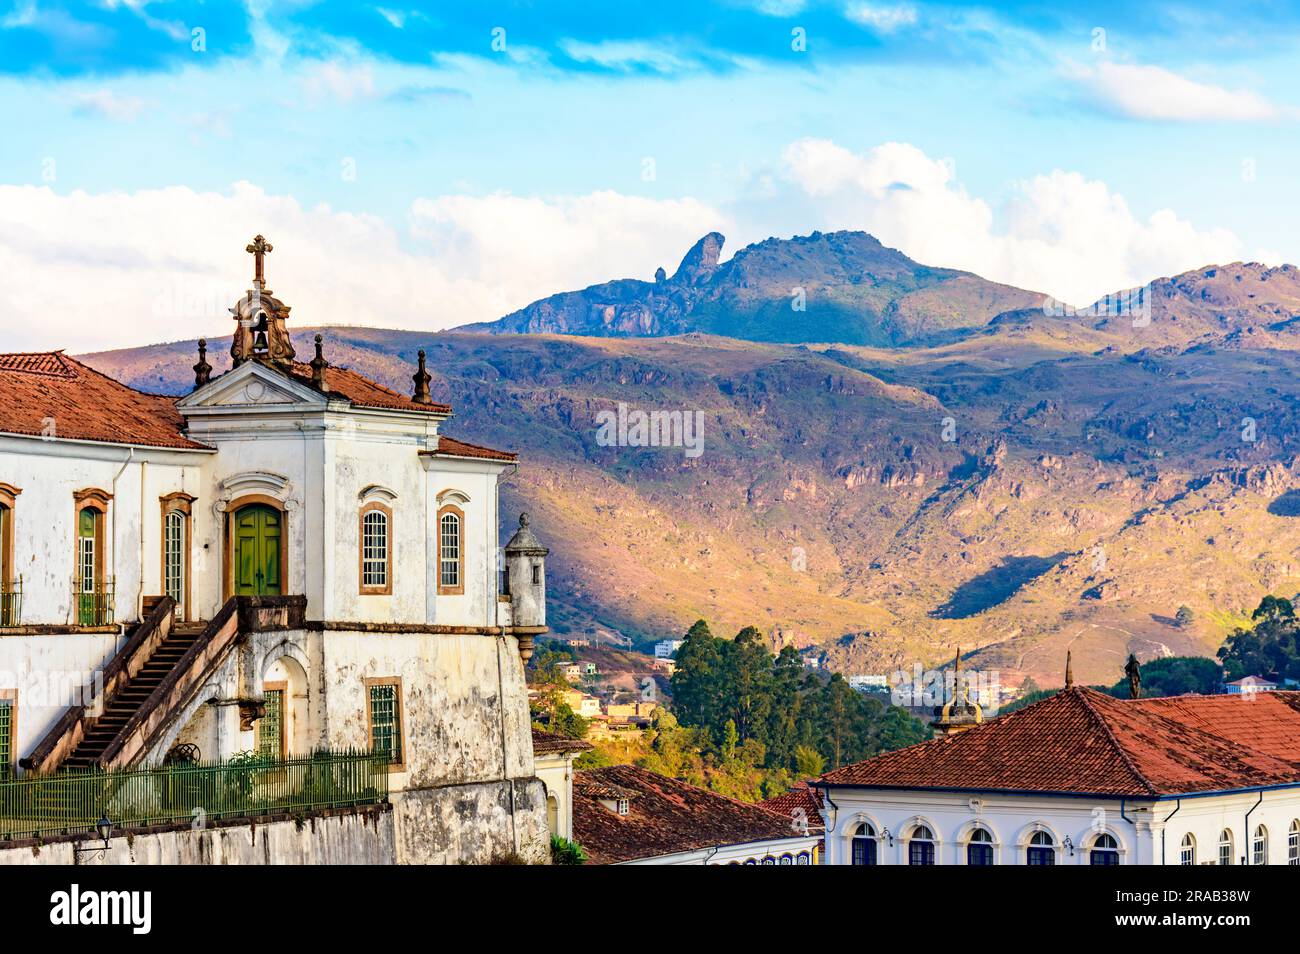 Baroque church and mountains in the city of Ouro Preto in Minas Gerais with the mountains and peak of Itacolomi in the background during sunset Stock Photo